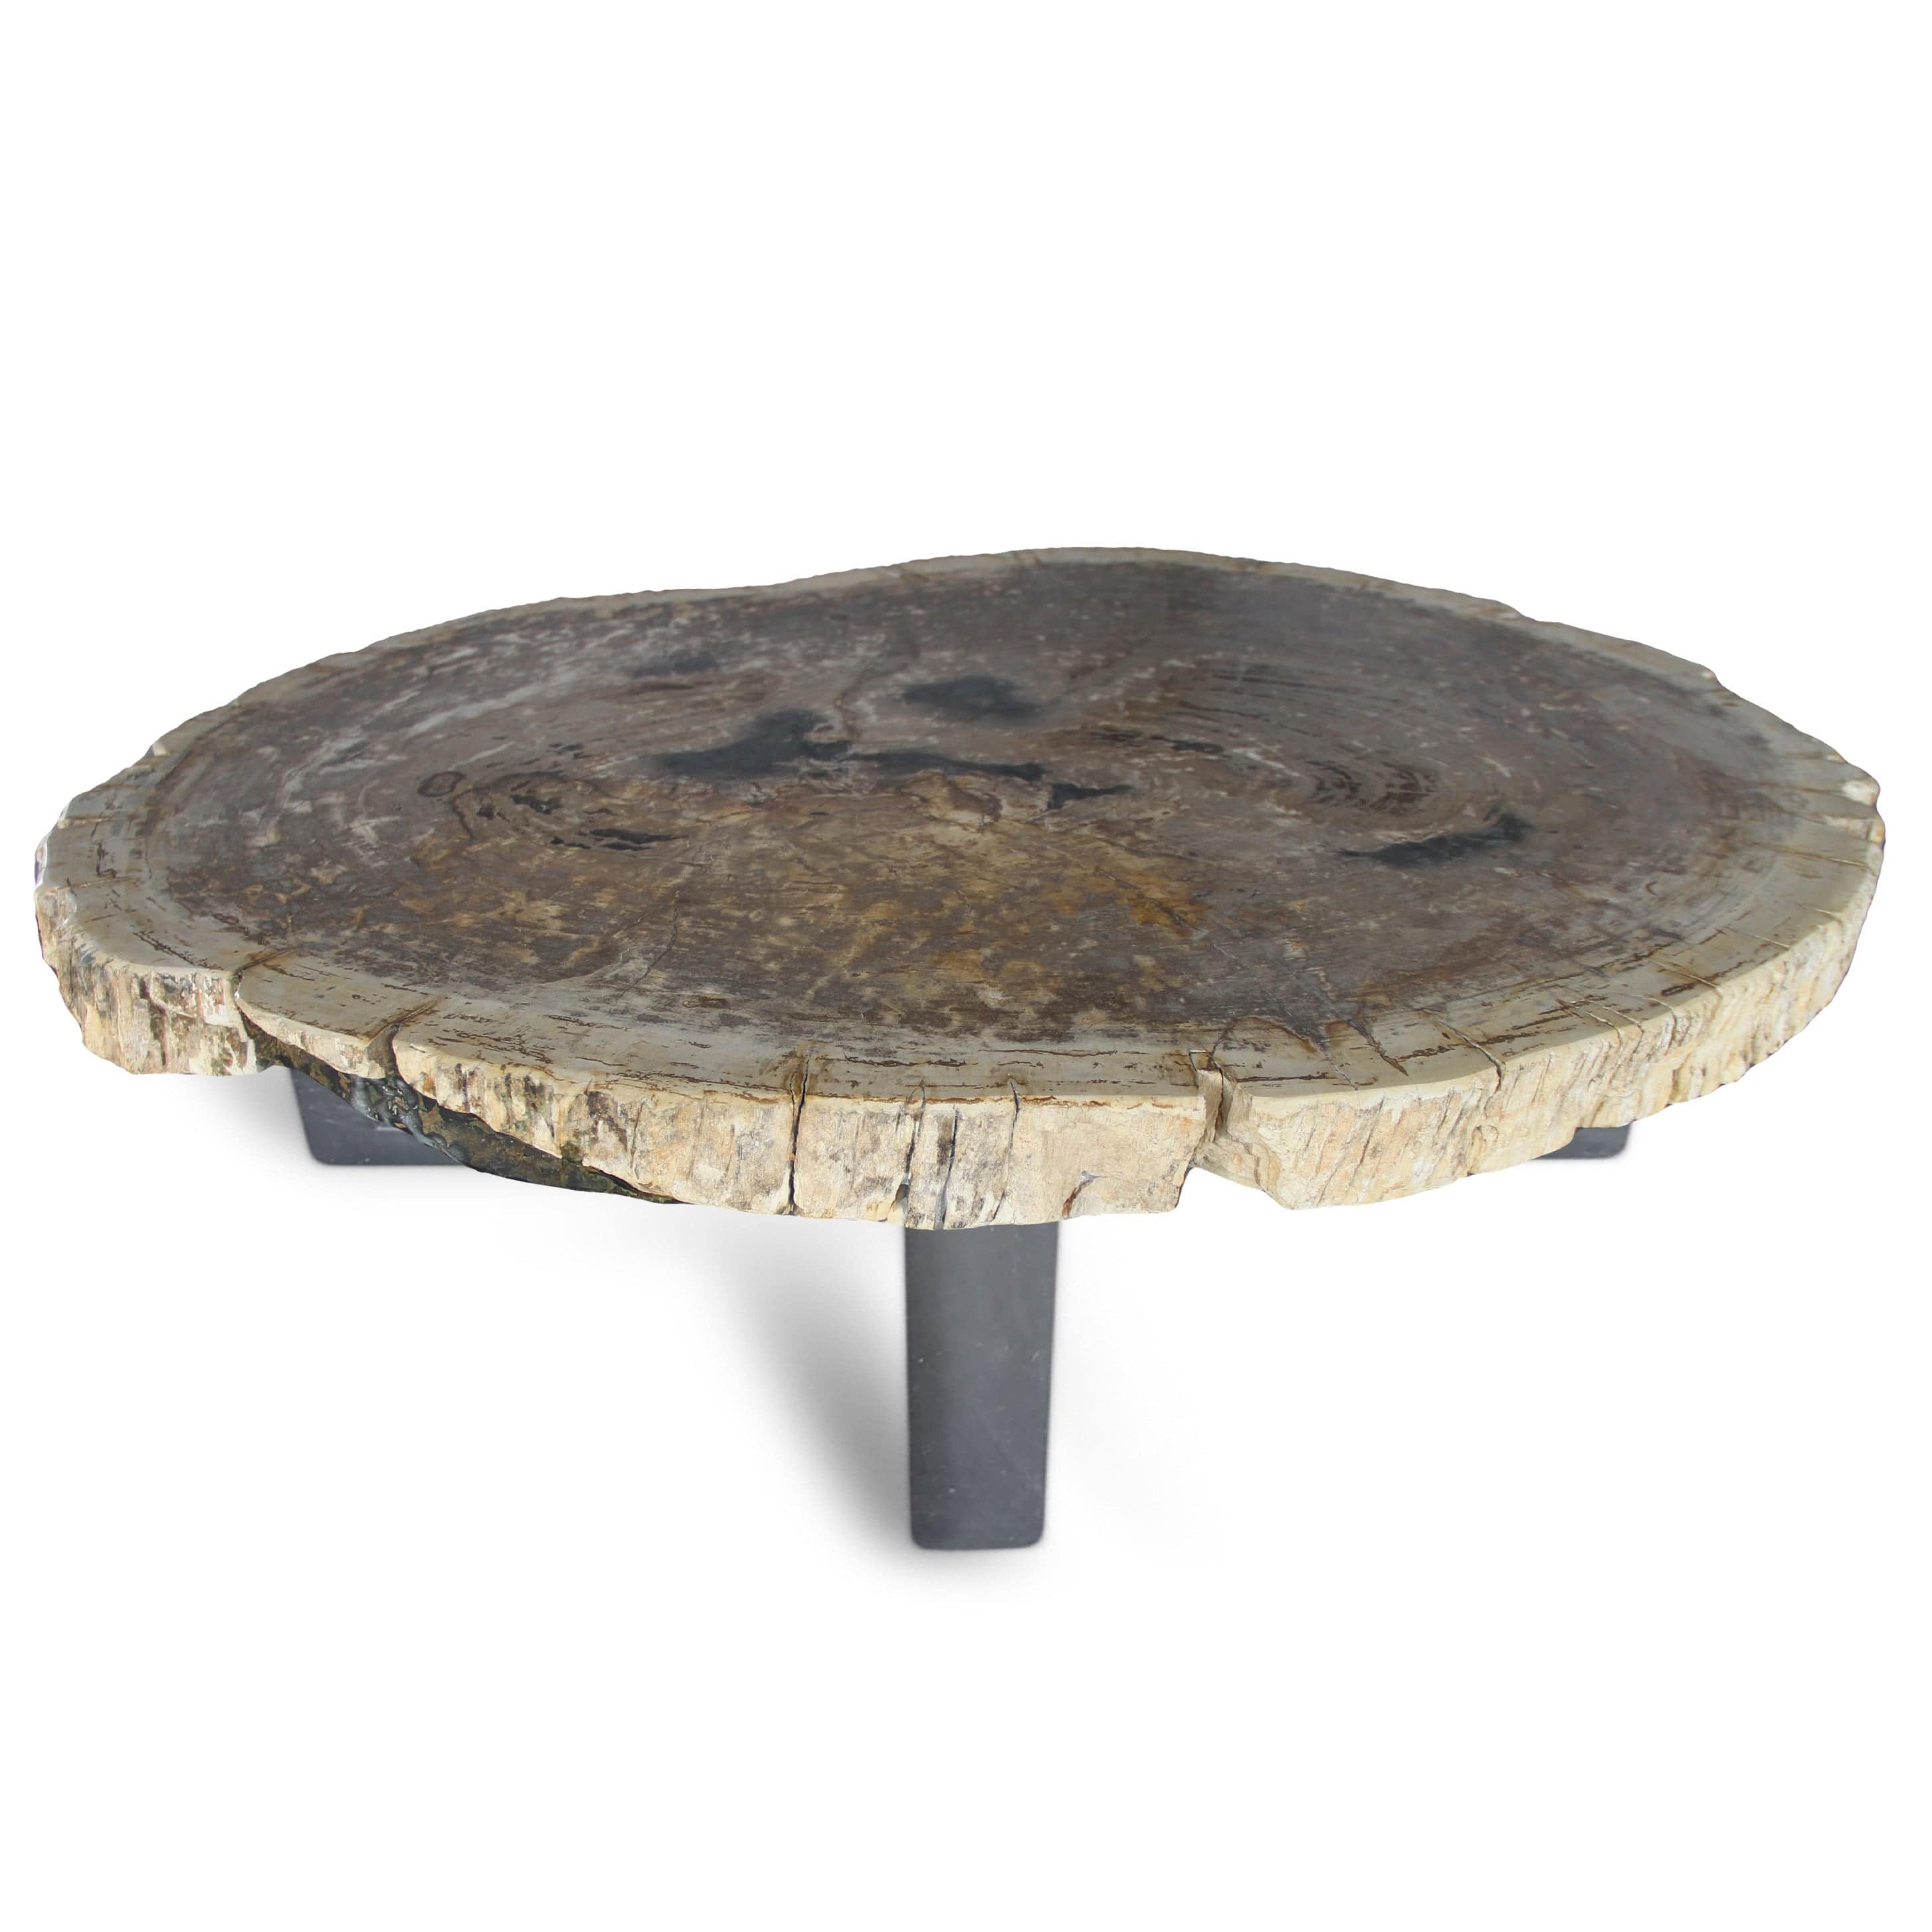 Kalifano Petrified Wood Petrified Wood Round Slab Coffee Table from Indonesia - 36" / 141 lbs PWT5200.002